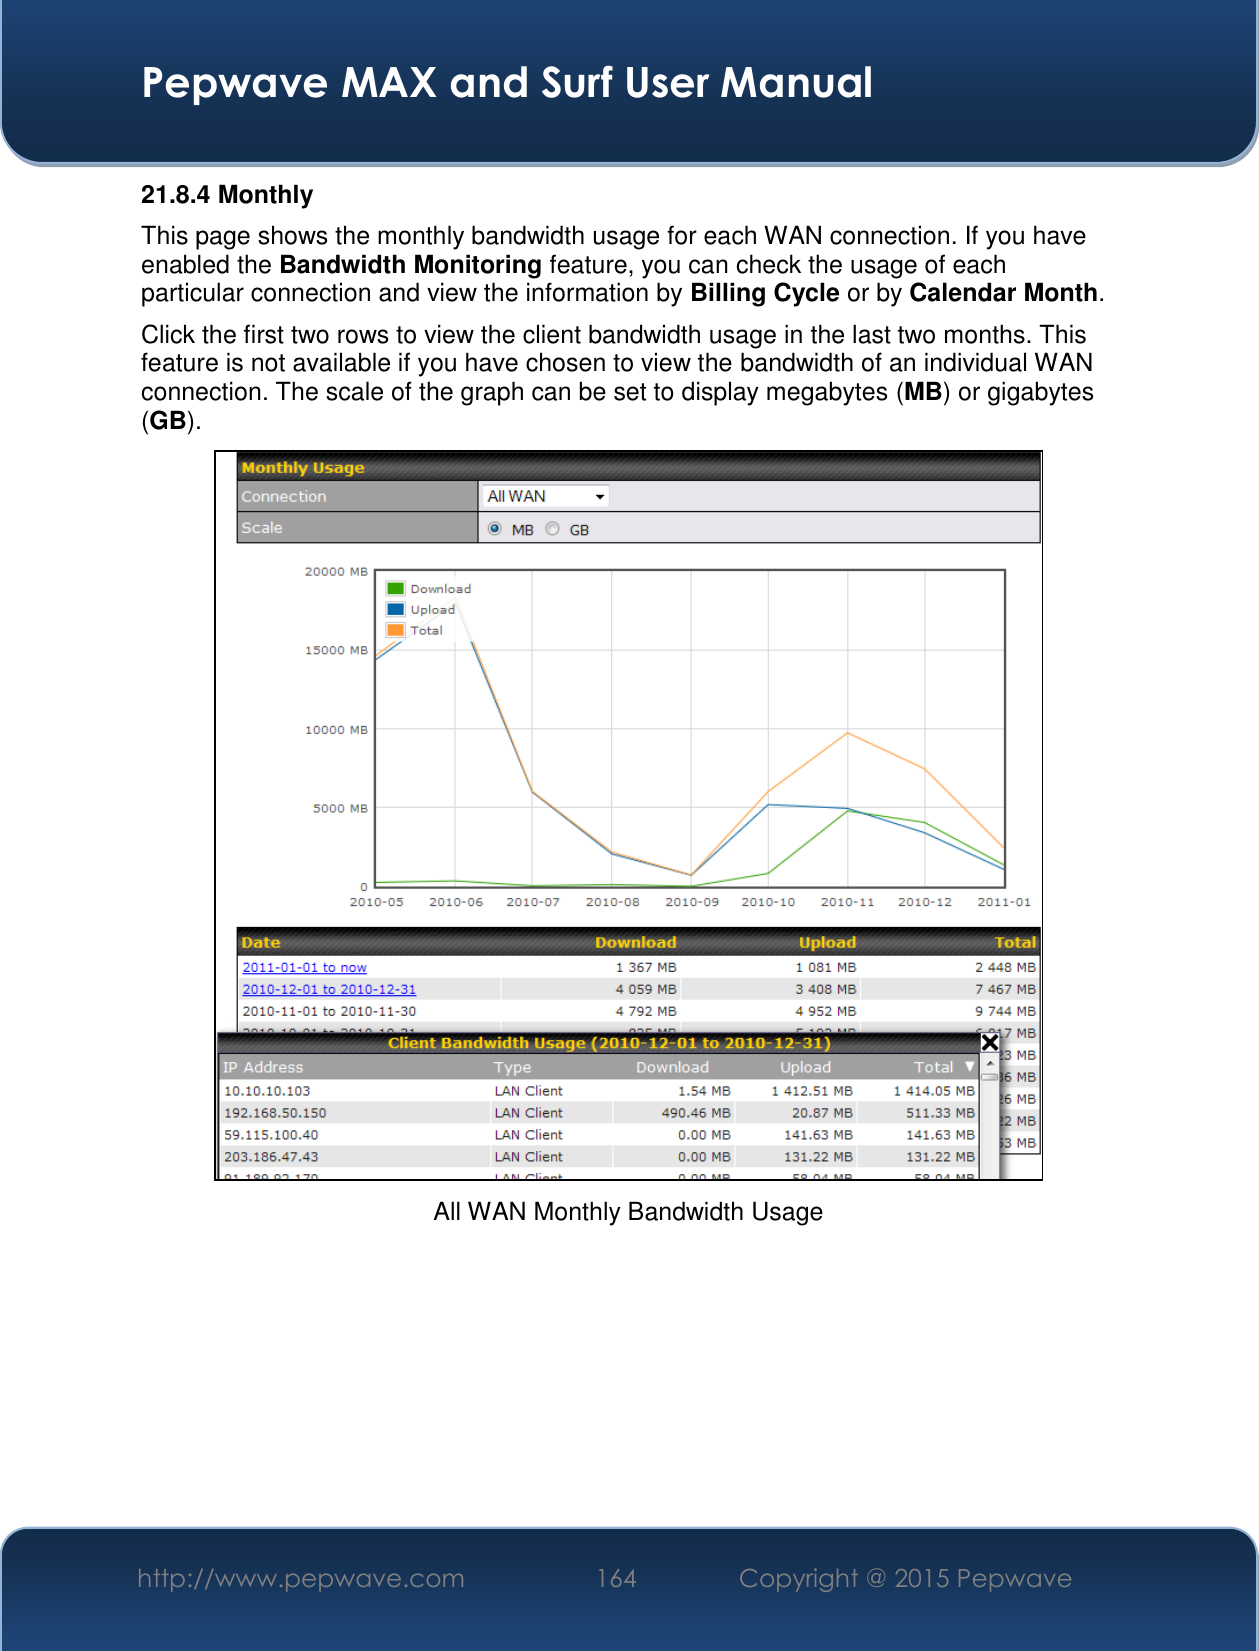  Pepwave MAX and Surf User Manual http://www.pepwave.com 164   Copyright @ 2015 Pepwave   21.8.4 Monthly This page shows the monthly bandwidth usage for each WAN connection. If you have enabled the Bandwidth Monitoring feature, you can check the usage of each particular connection and view the information by Billing Cycle or by Calendar Month. Click the first two rows to view the client bandwidth usage in the last two months. This feature is not available if you have chosen to view the bandwidth of an individual WAN connection. The scale of the graph can be set to display megabytes (MB) or gigabytes (GB).  All WAN Monthly Bandwidth Usage 